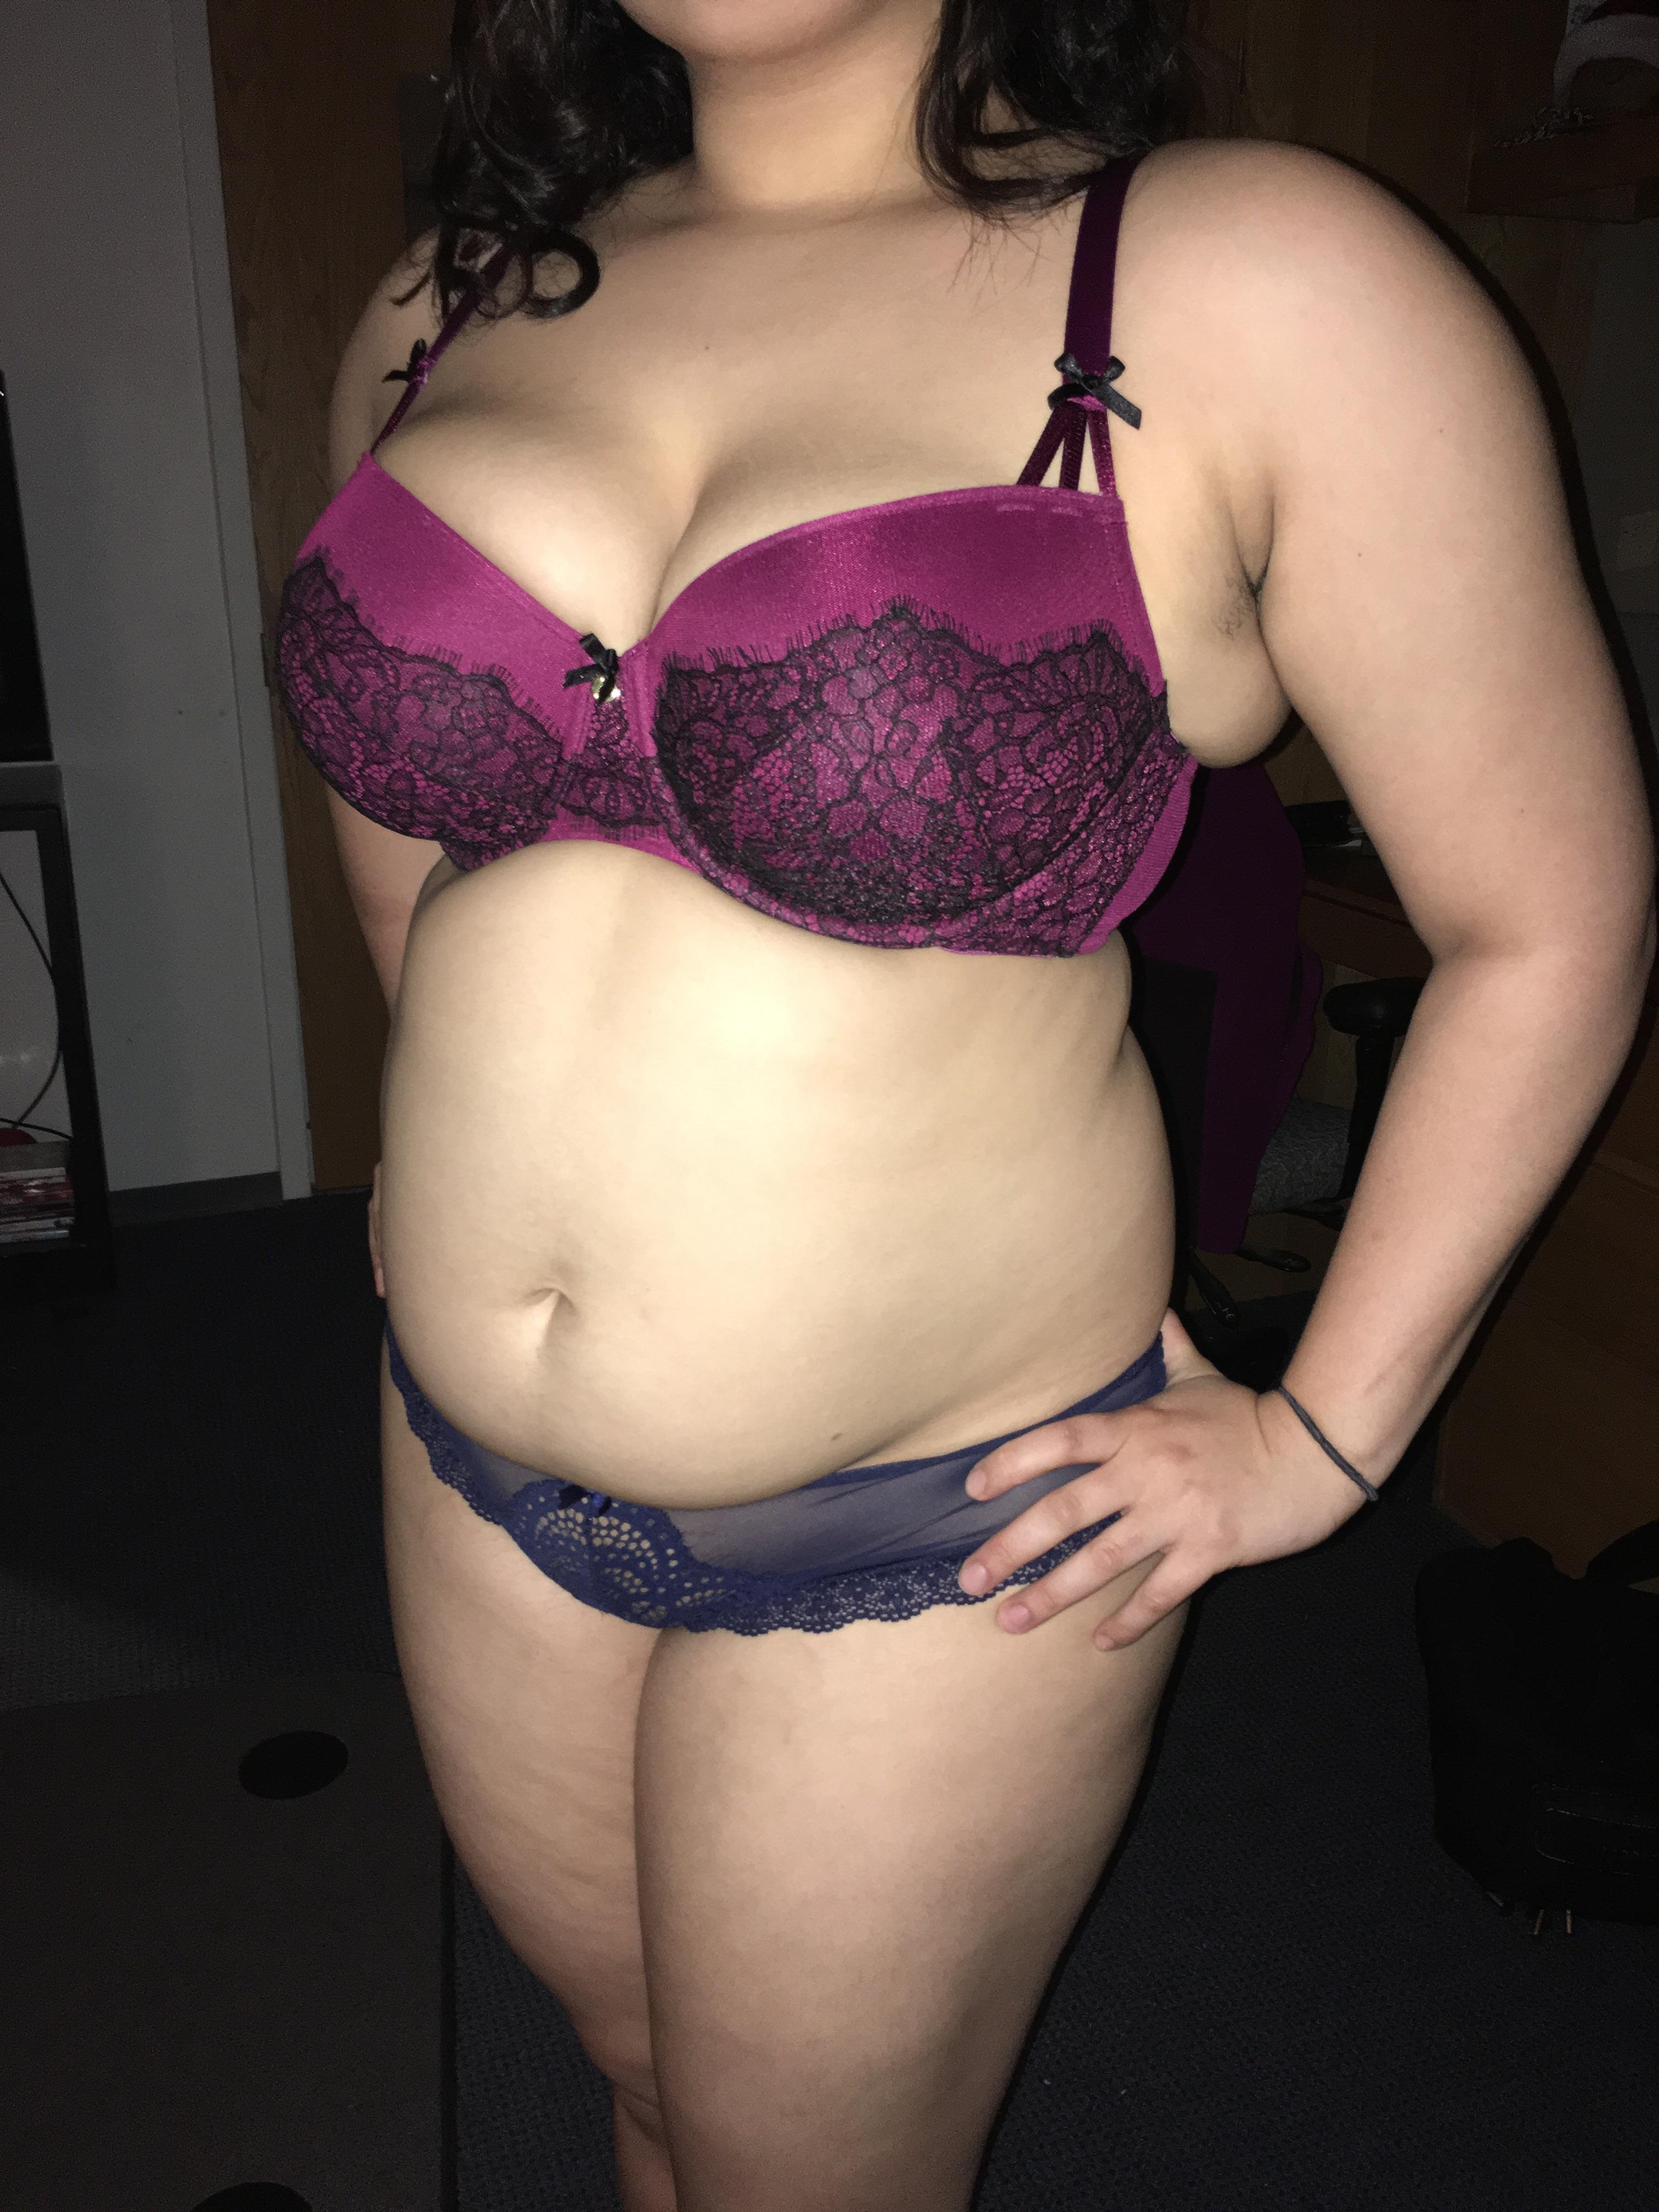 What Do You Think of My New Bra?